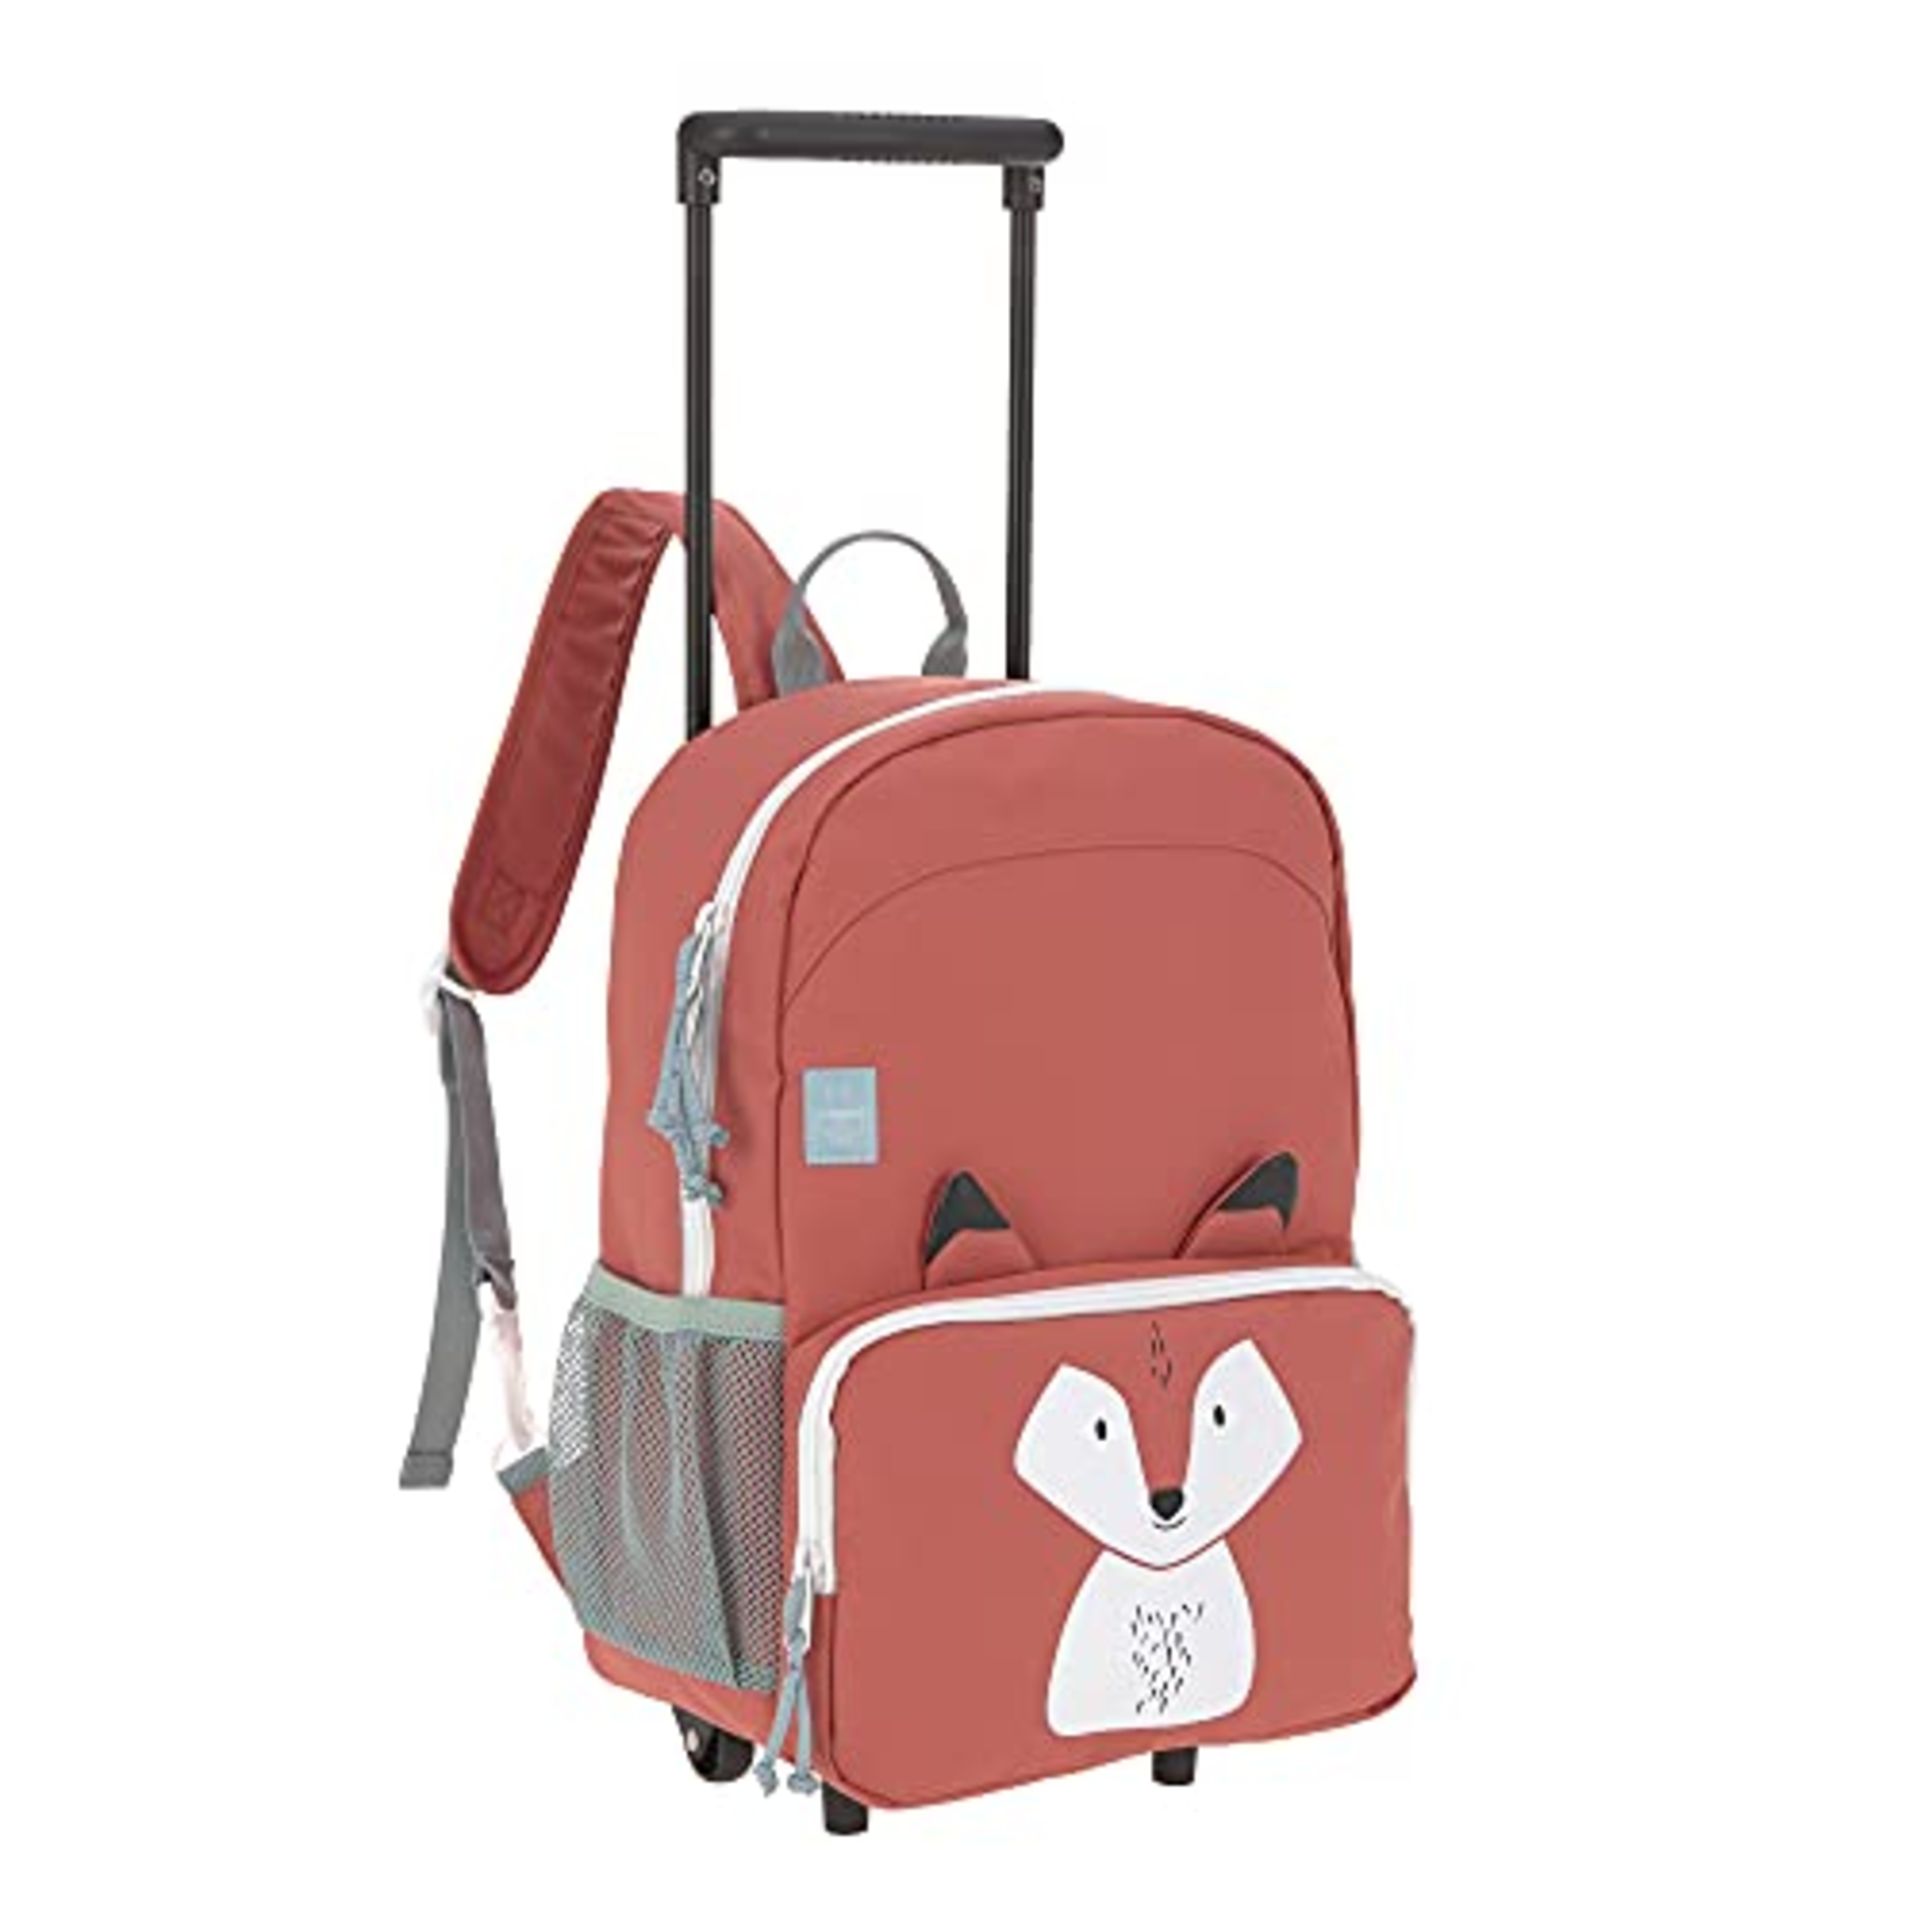 LÄSSIG About Friends Trolley Backpack 2 in 1 Kids Suitcase Backpack 25x16x39 cm Fox,